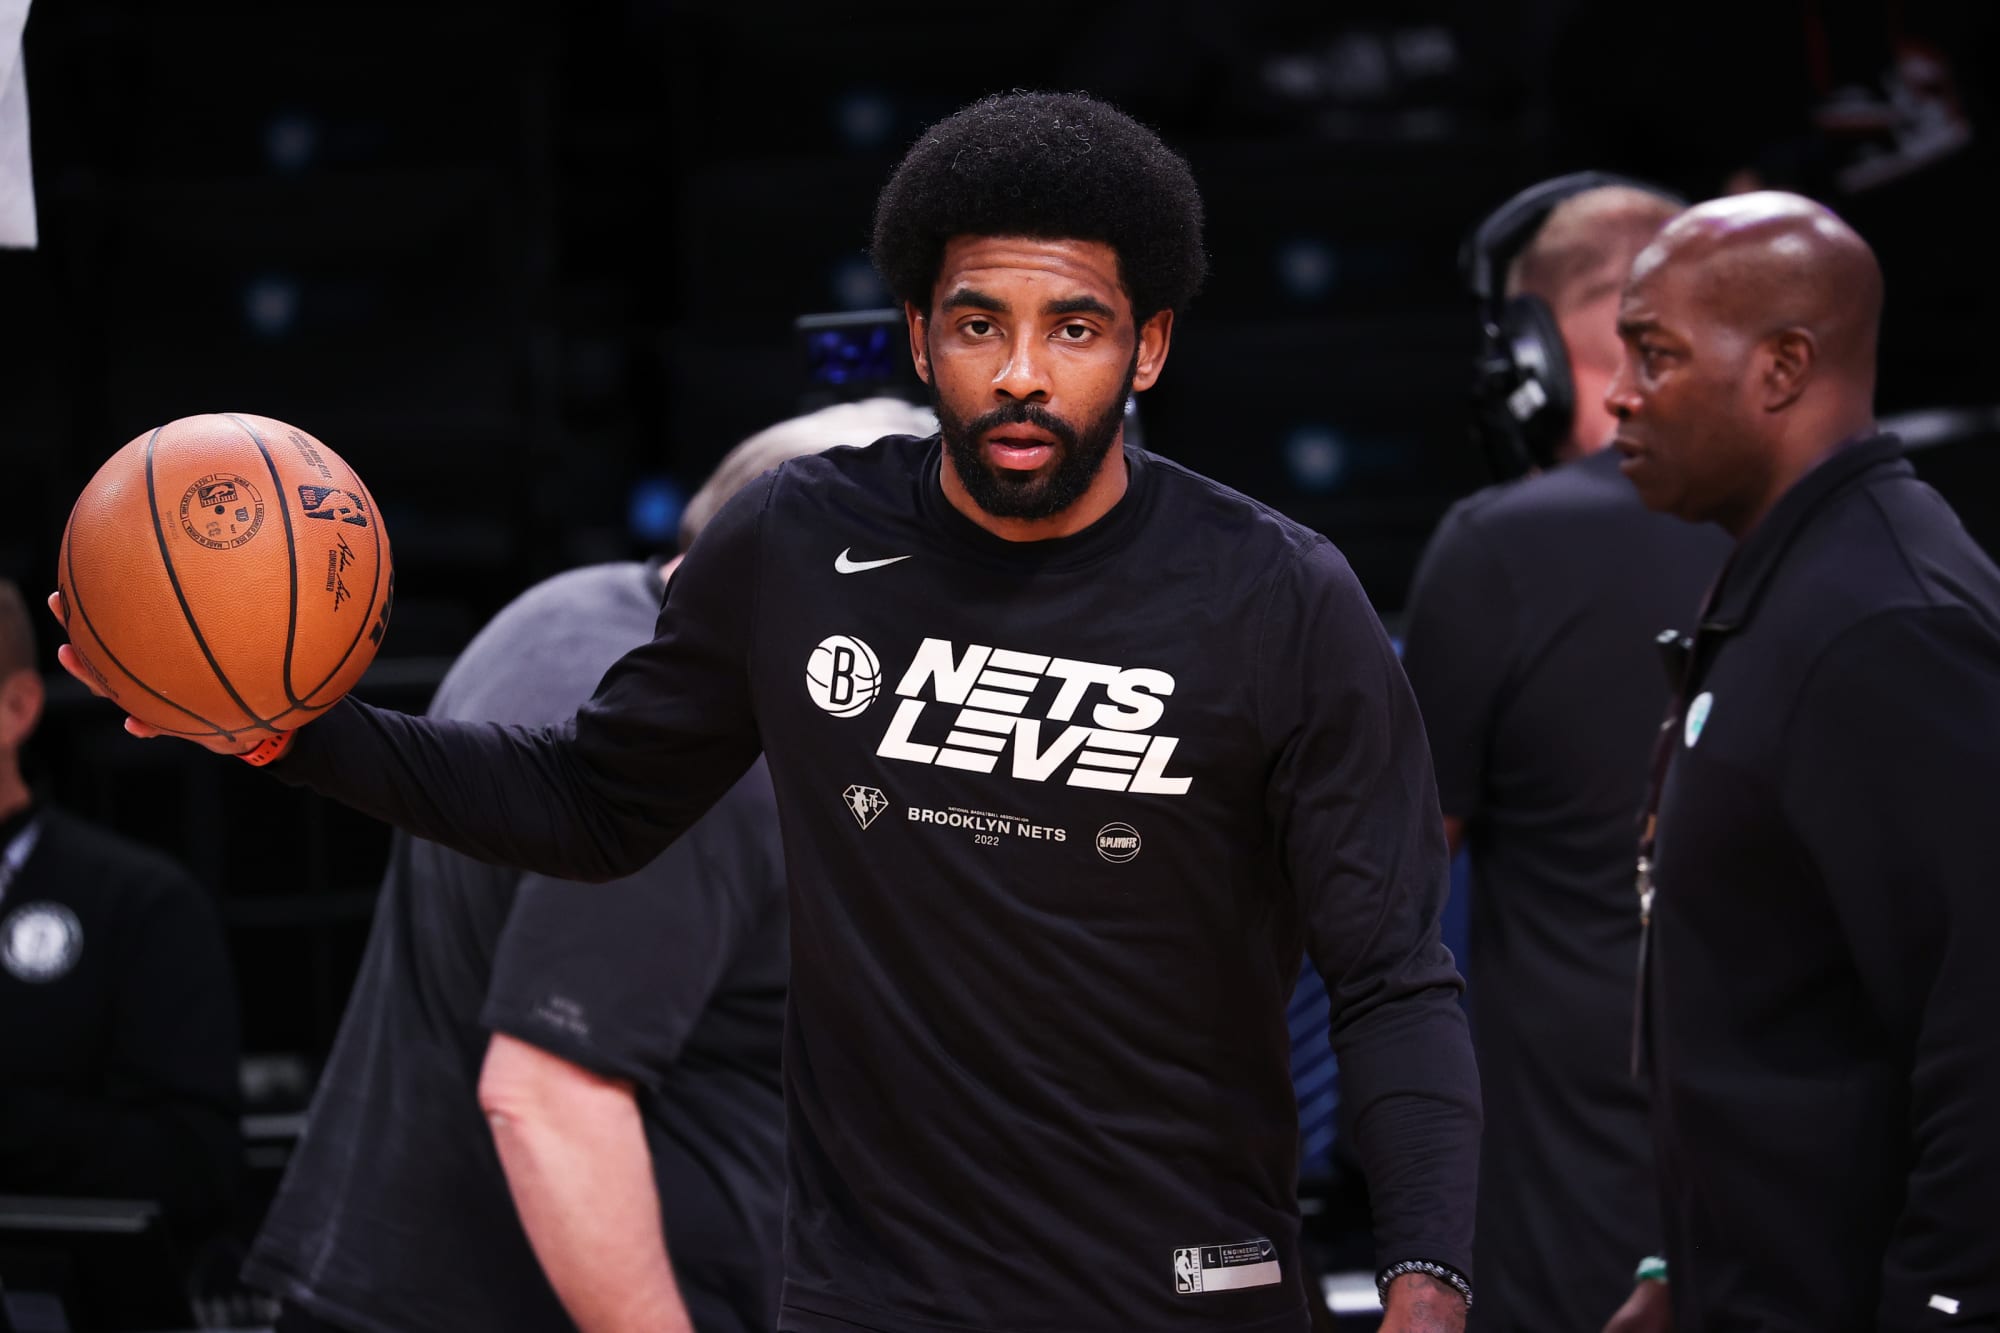 Lakers enthusiasts will love the explanation Kyrie Irving bailed at the Drew League Saturday